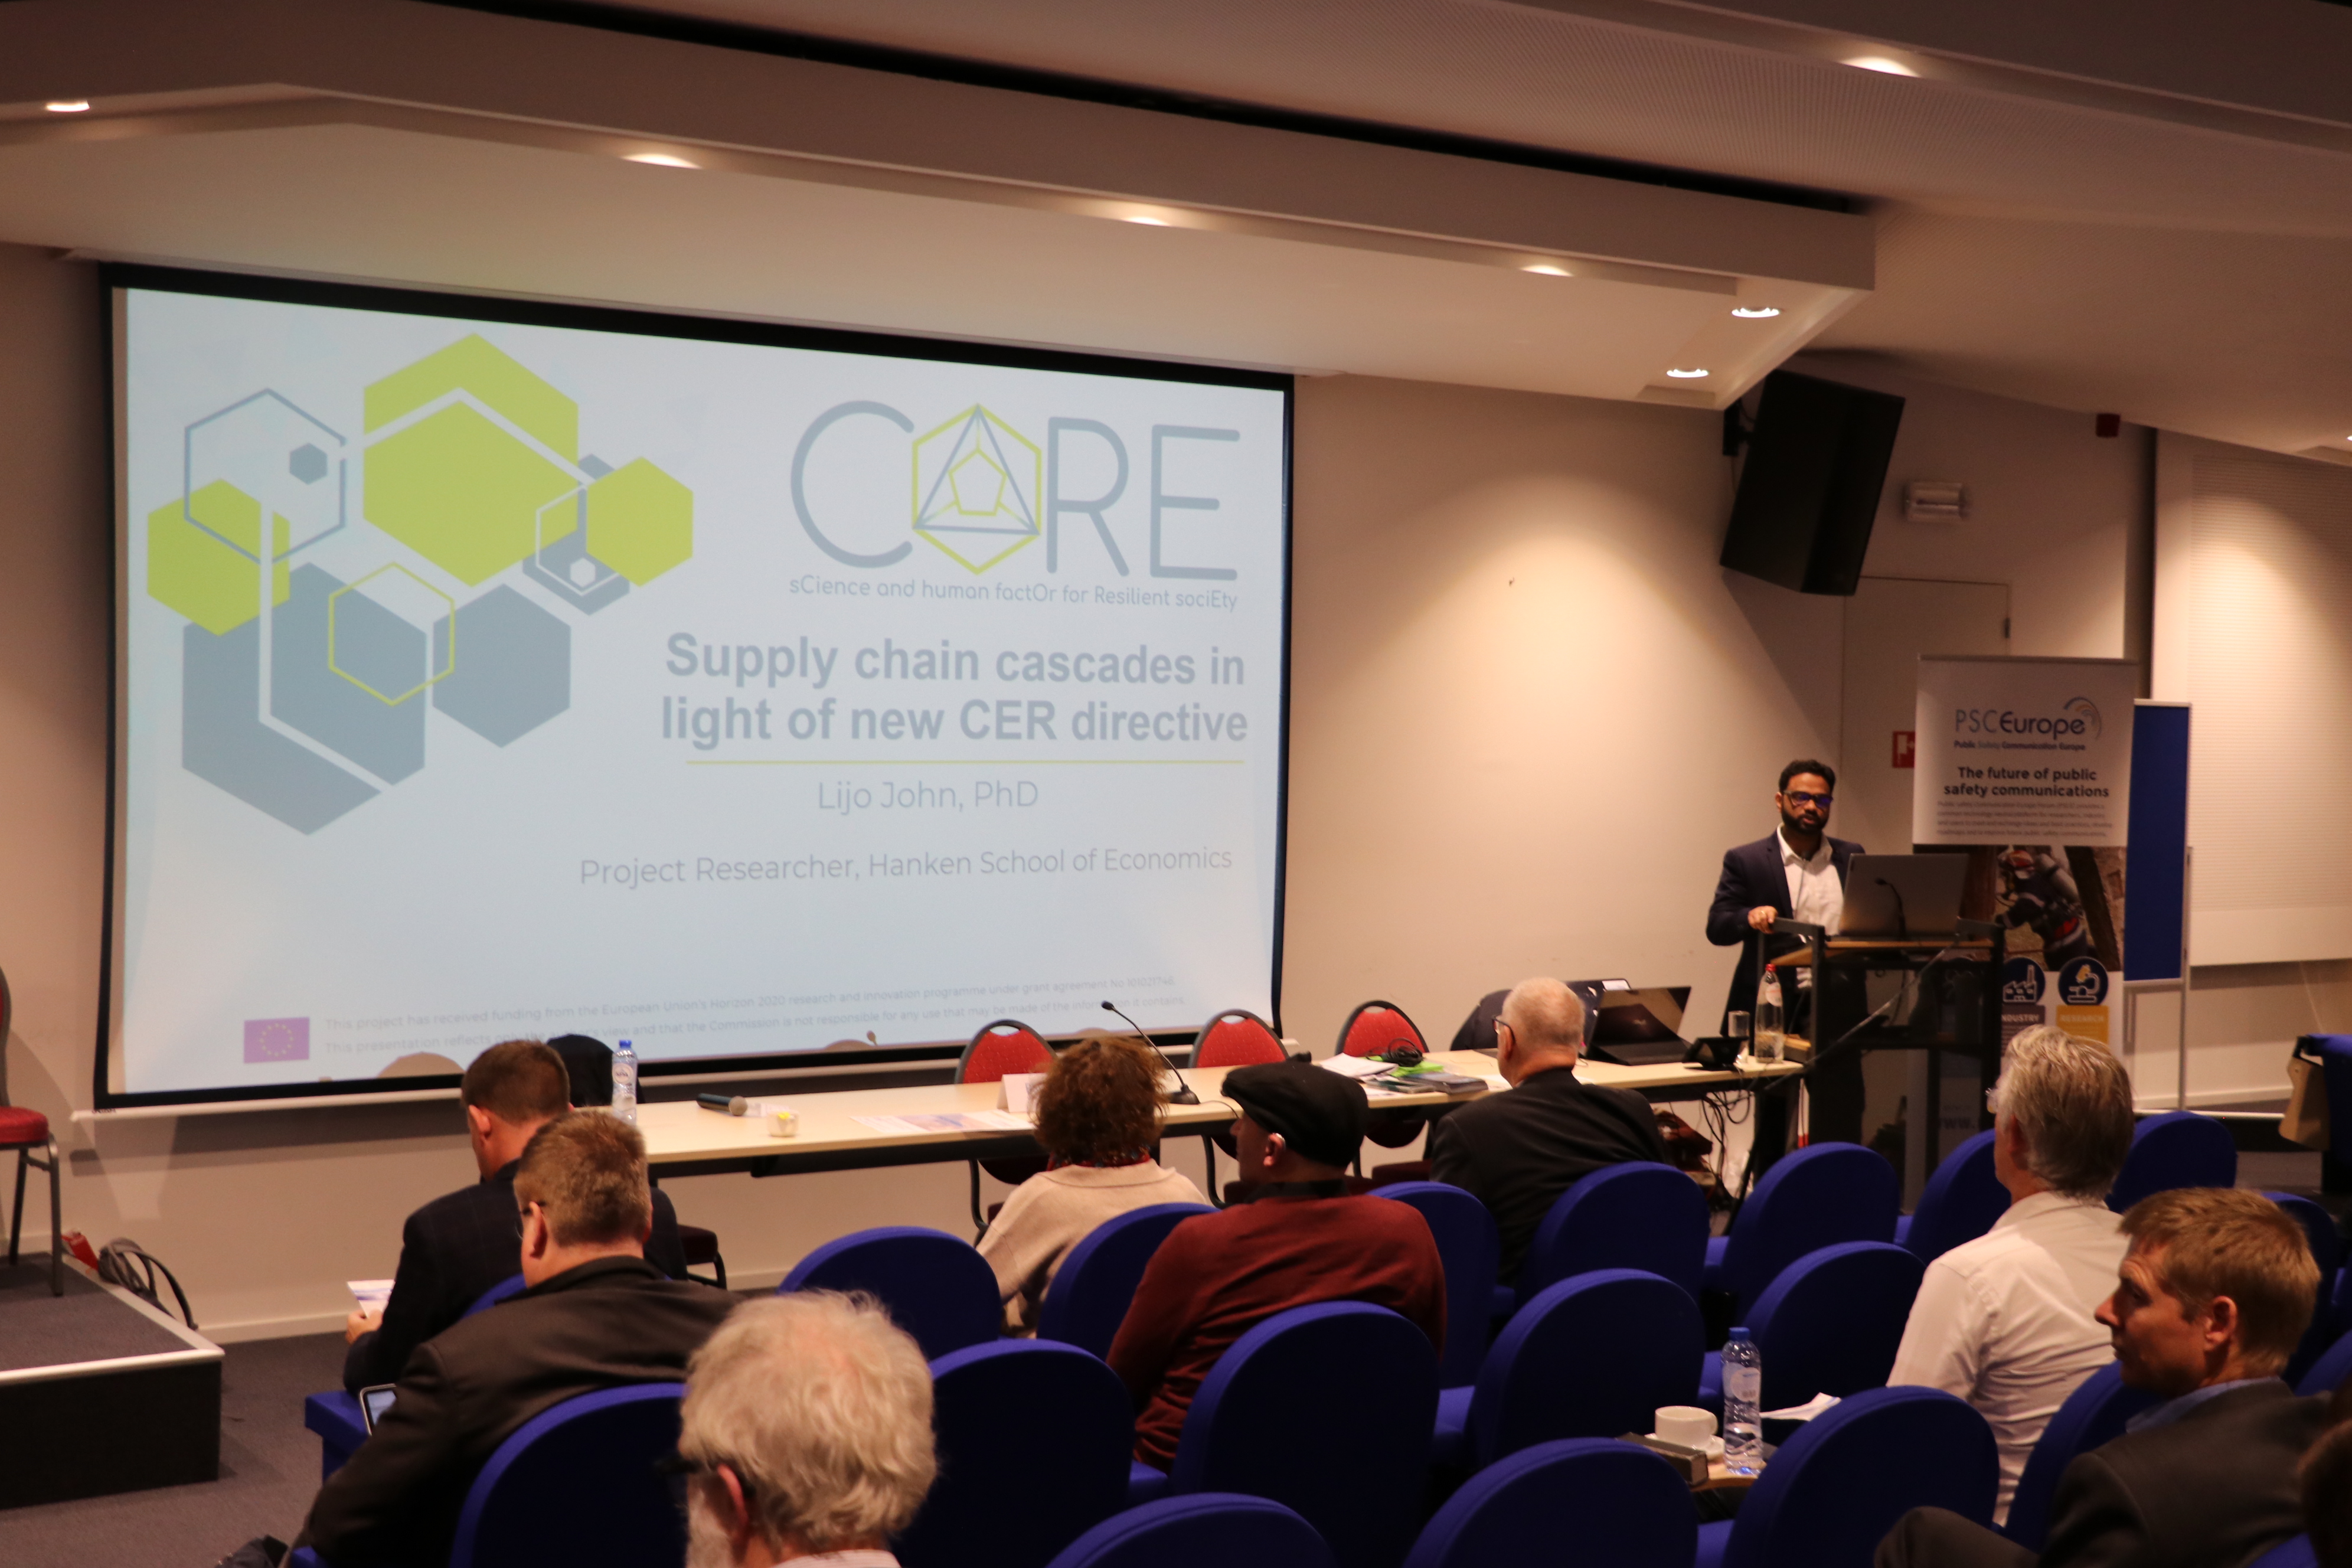 📰 [Participation to events] CORE EU-funded Project at Public Safety Communication Europe (PSCE) Winter Conference 2022 in Brussels 📰